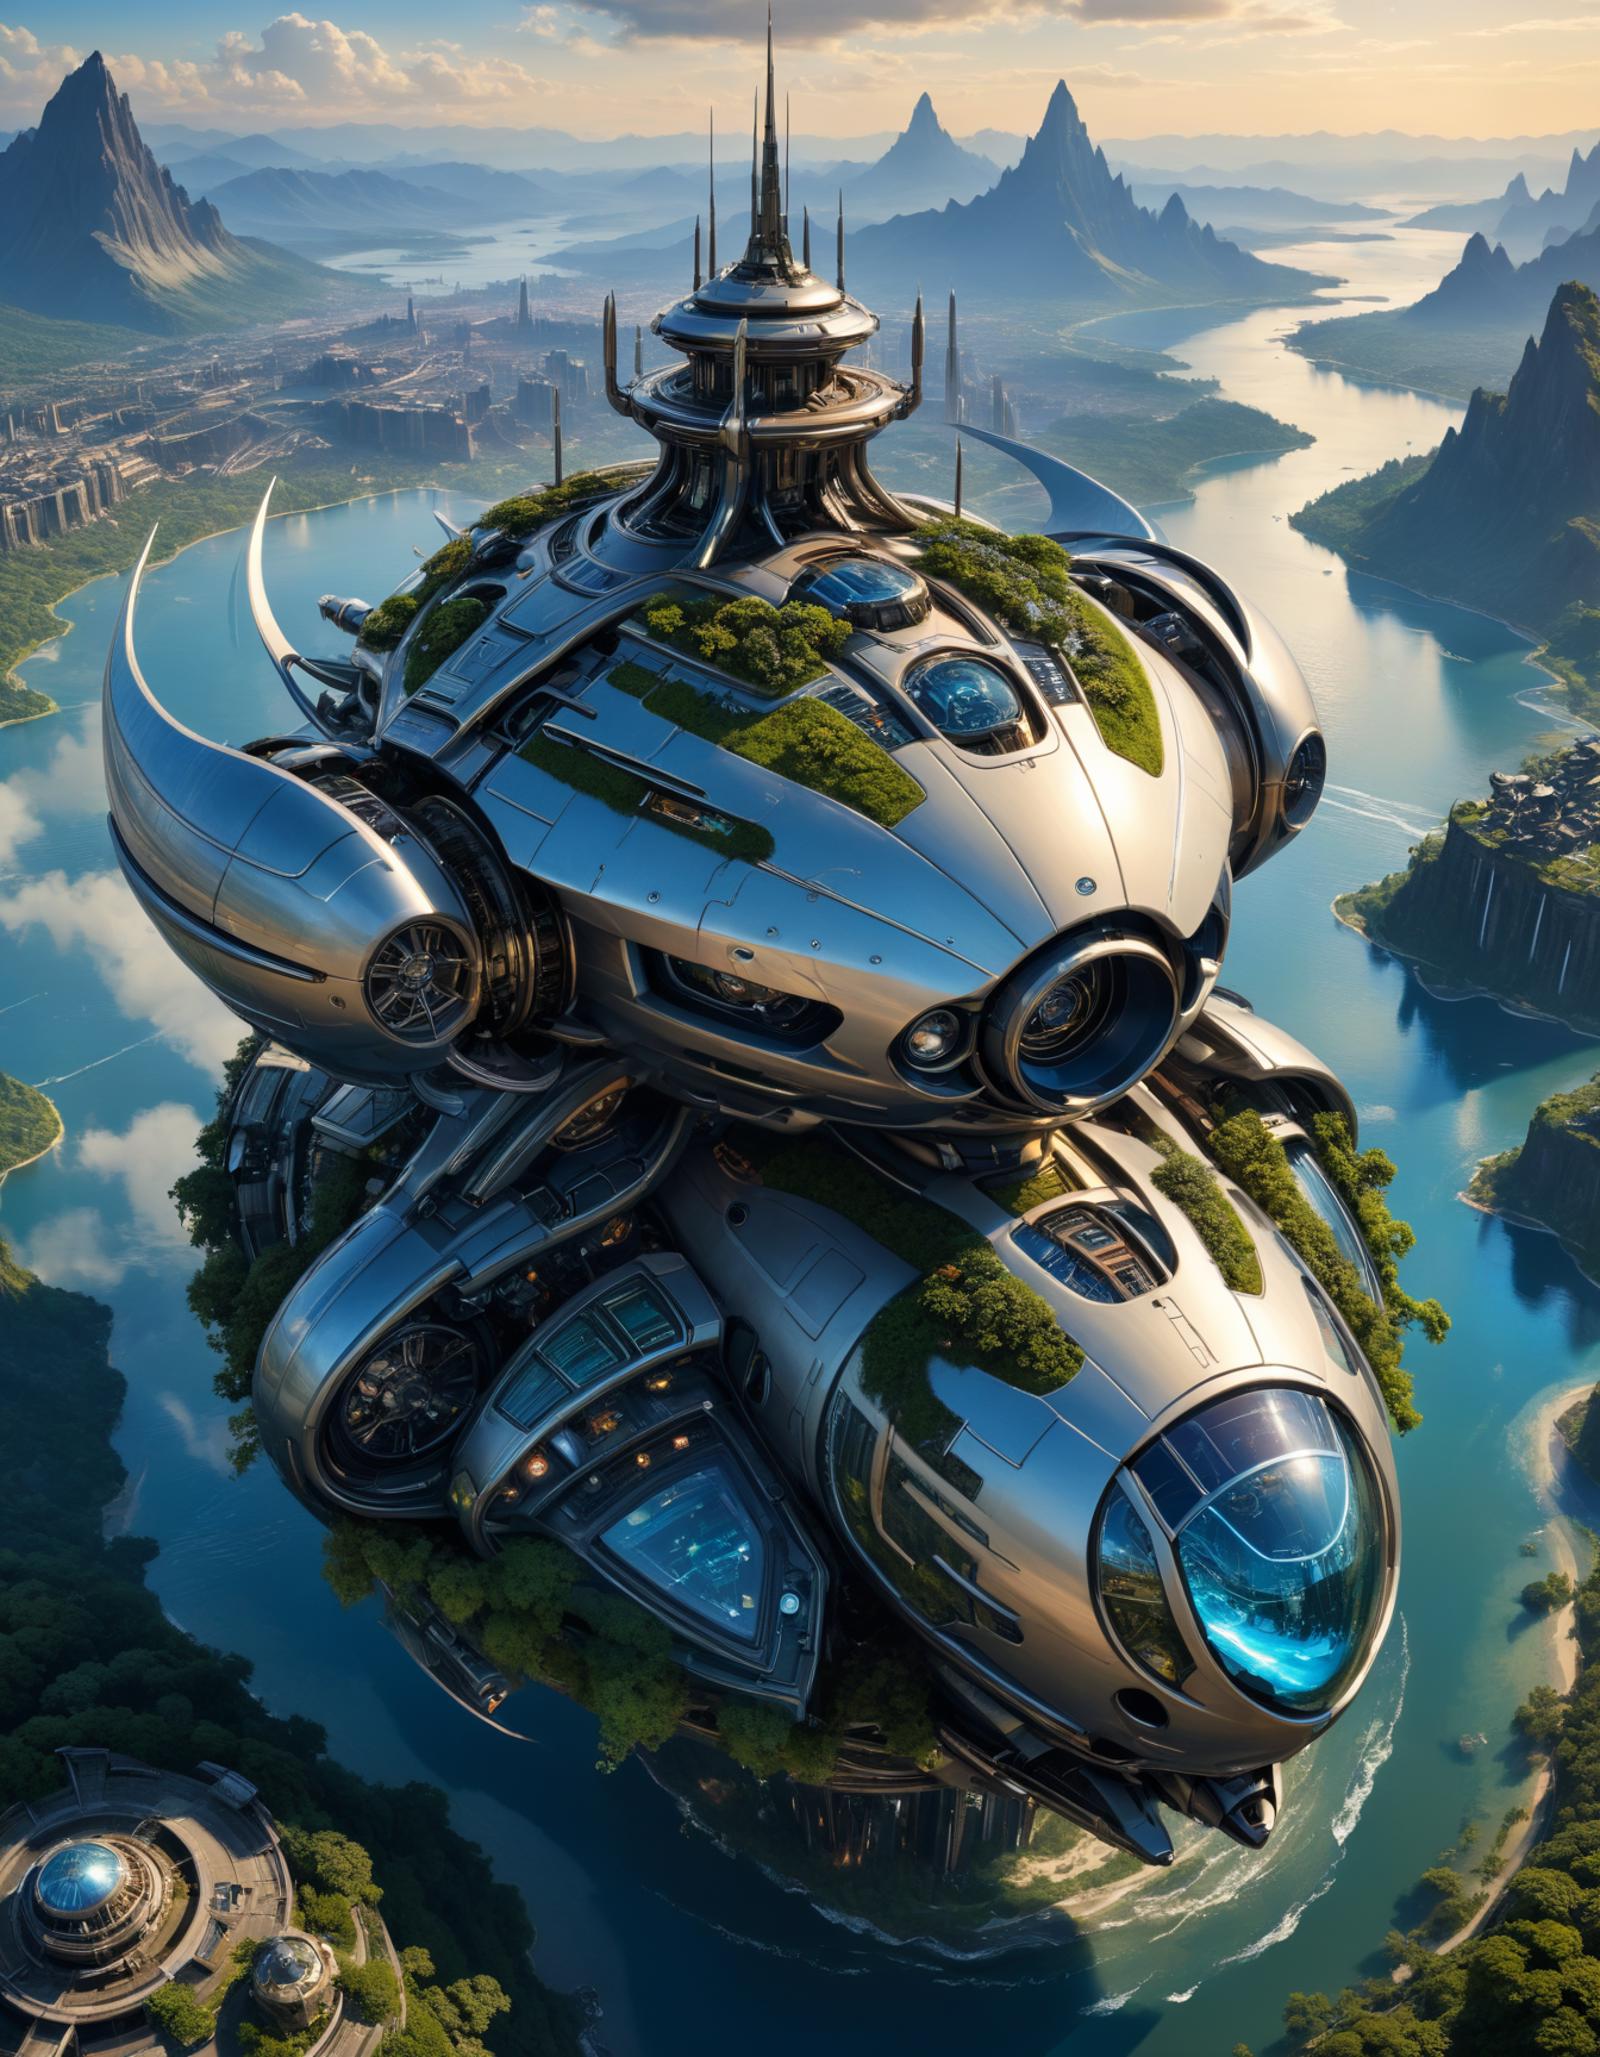 Futuristic Spacecraft with a City on Top and Green Roof, Flying over a Lake